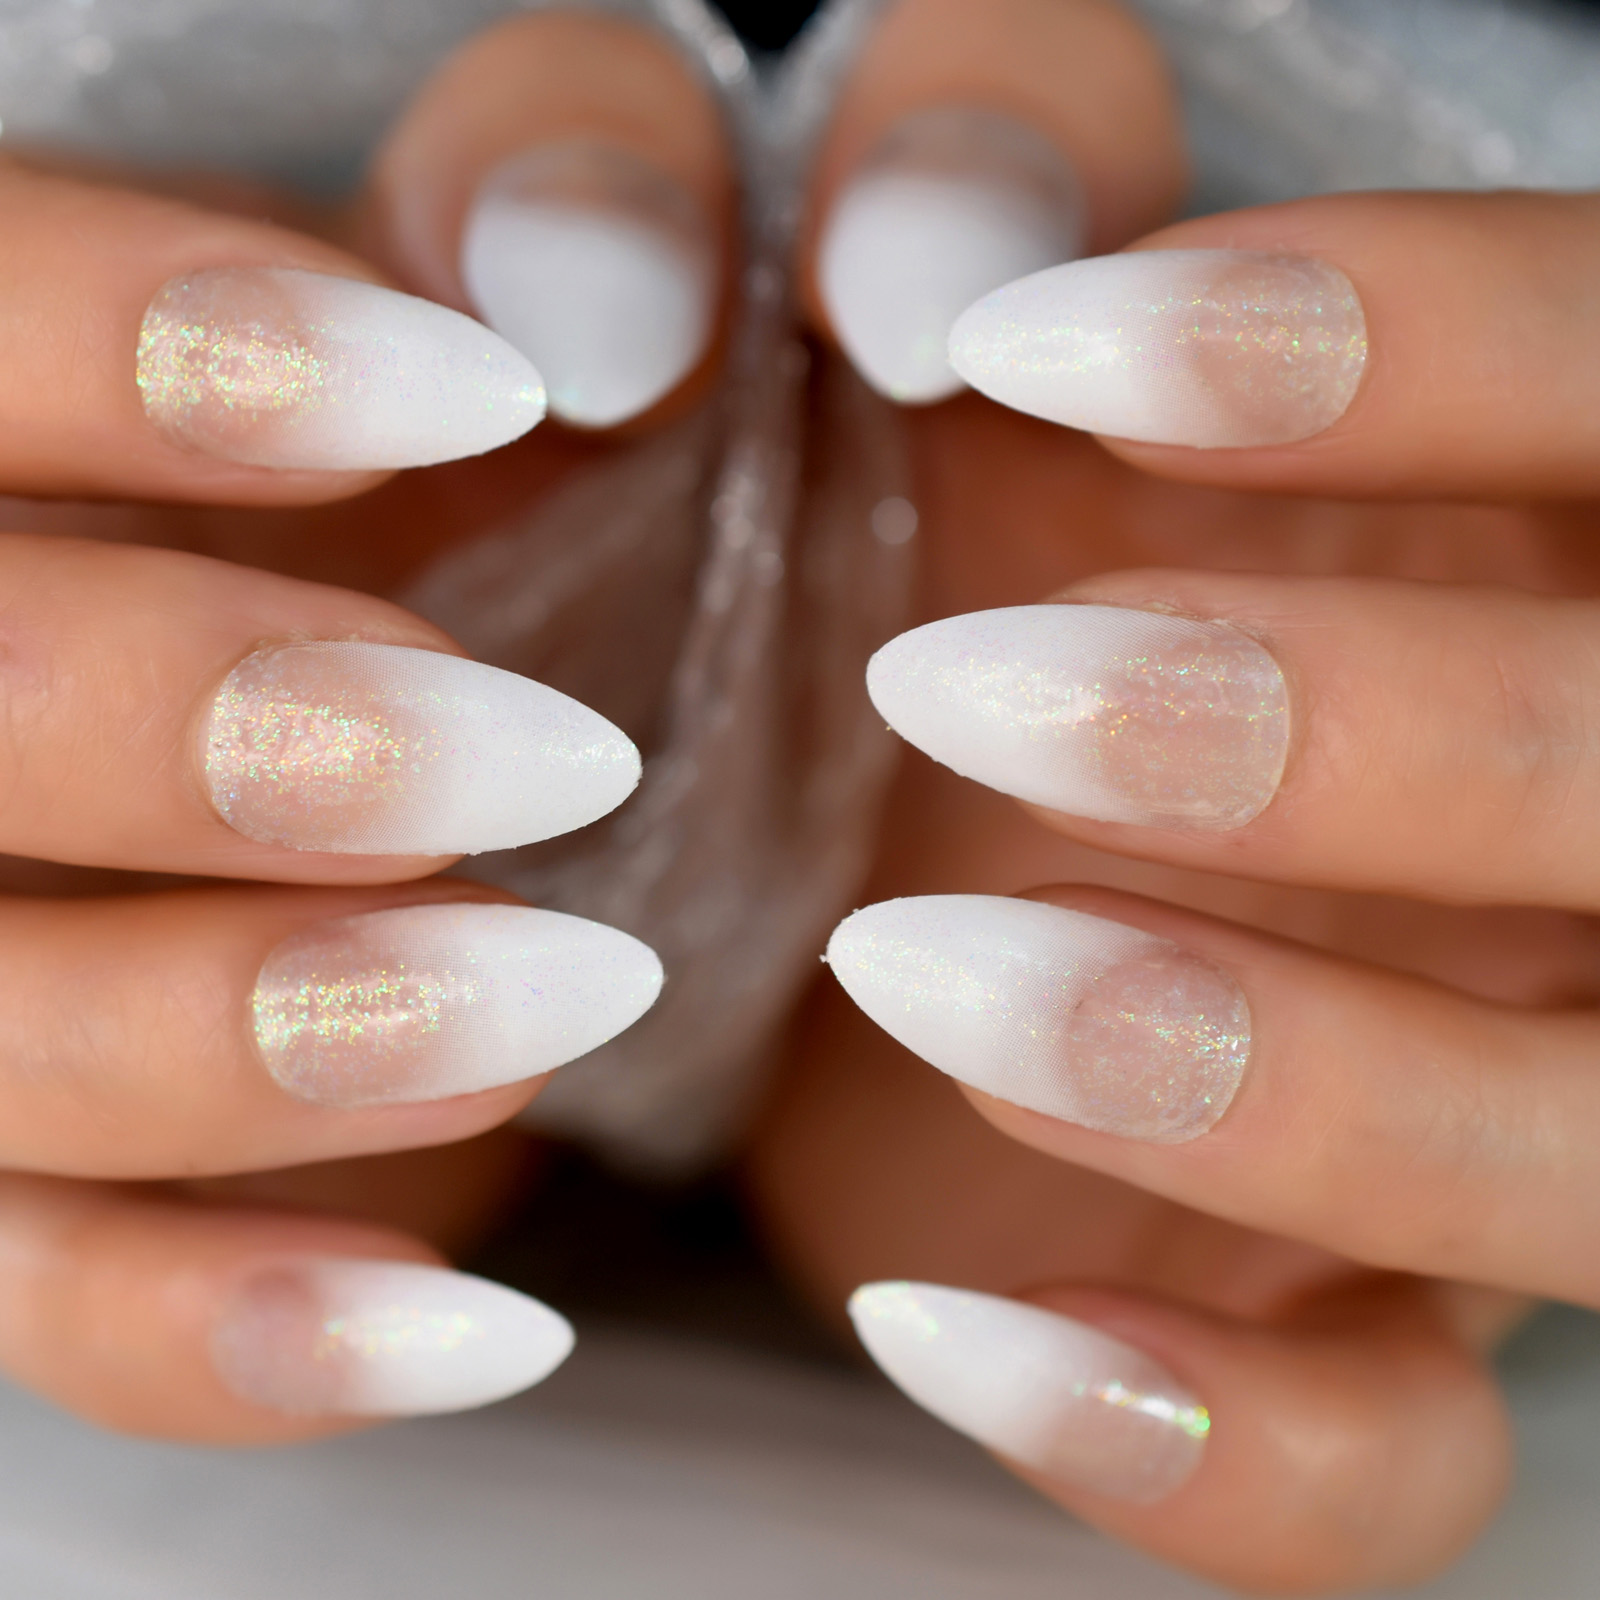 Decorated Almond Nails